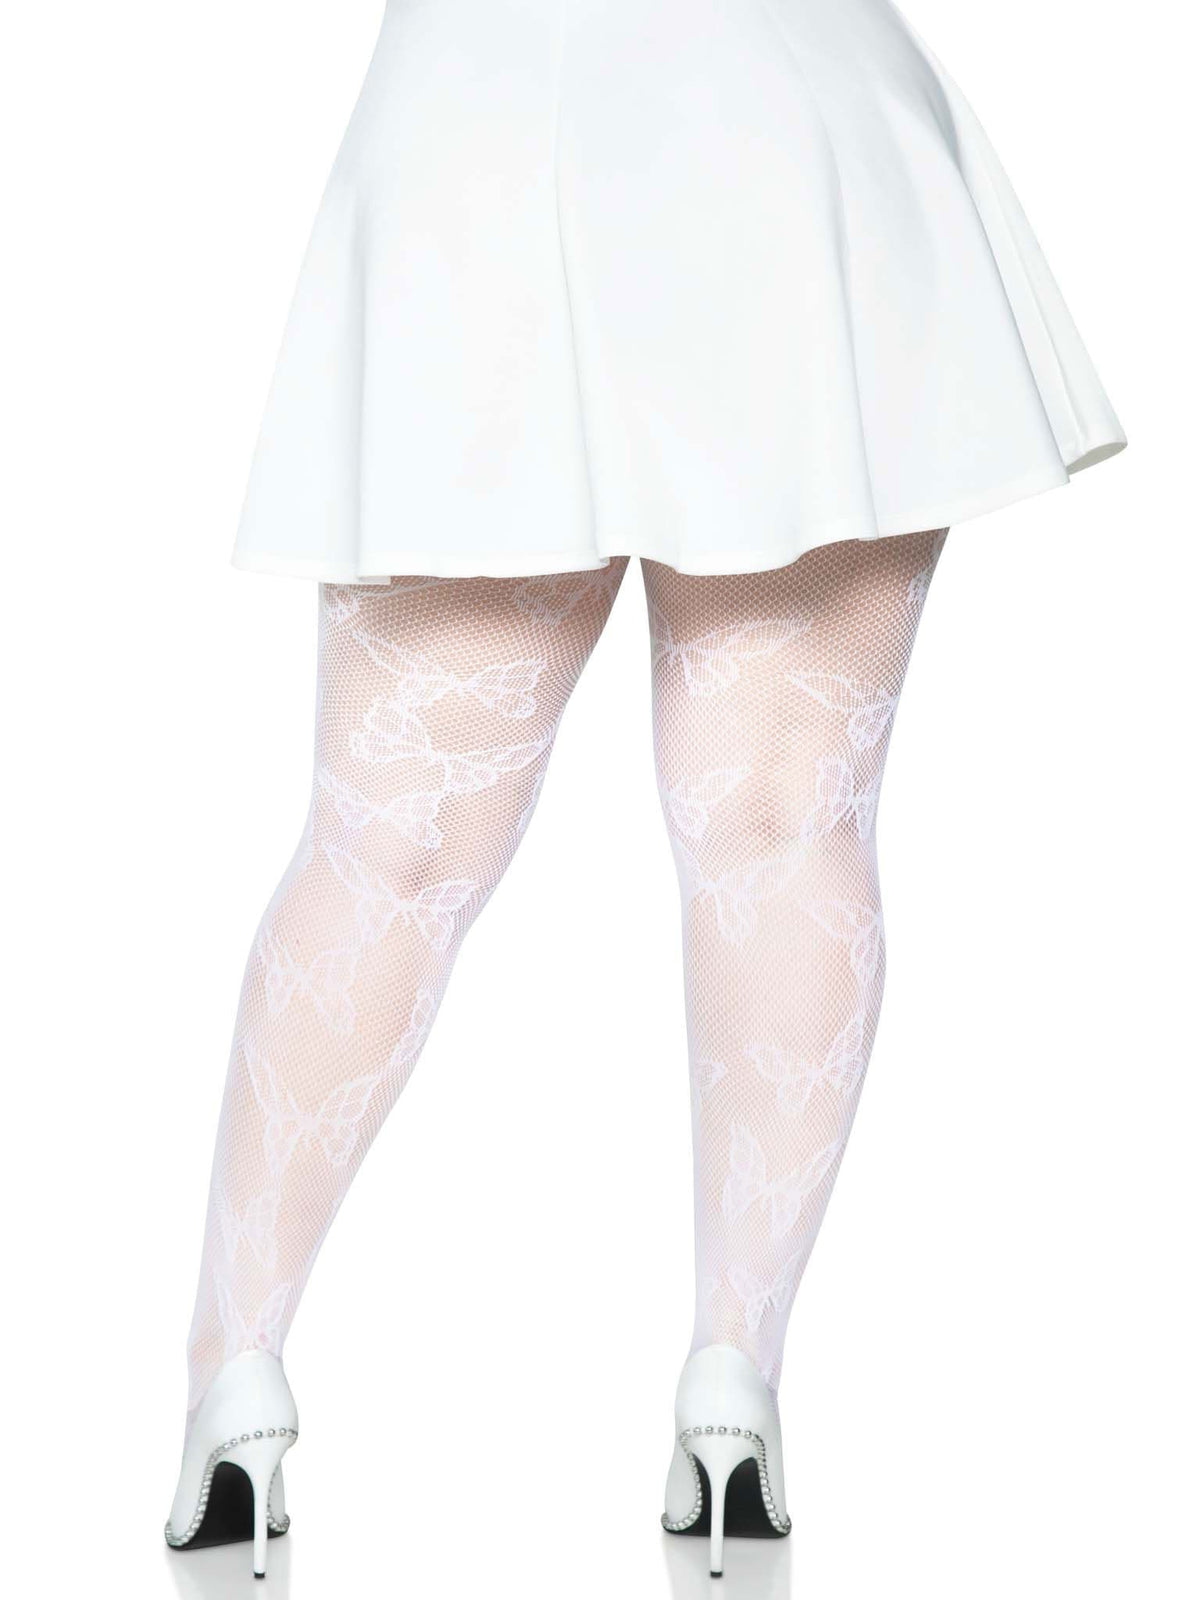 butterfly net tights 1x 2x white